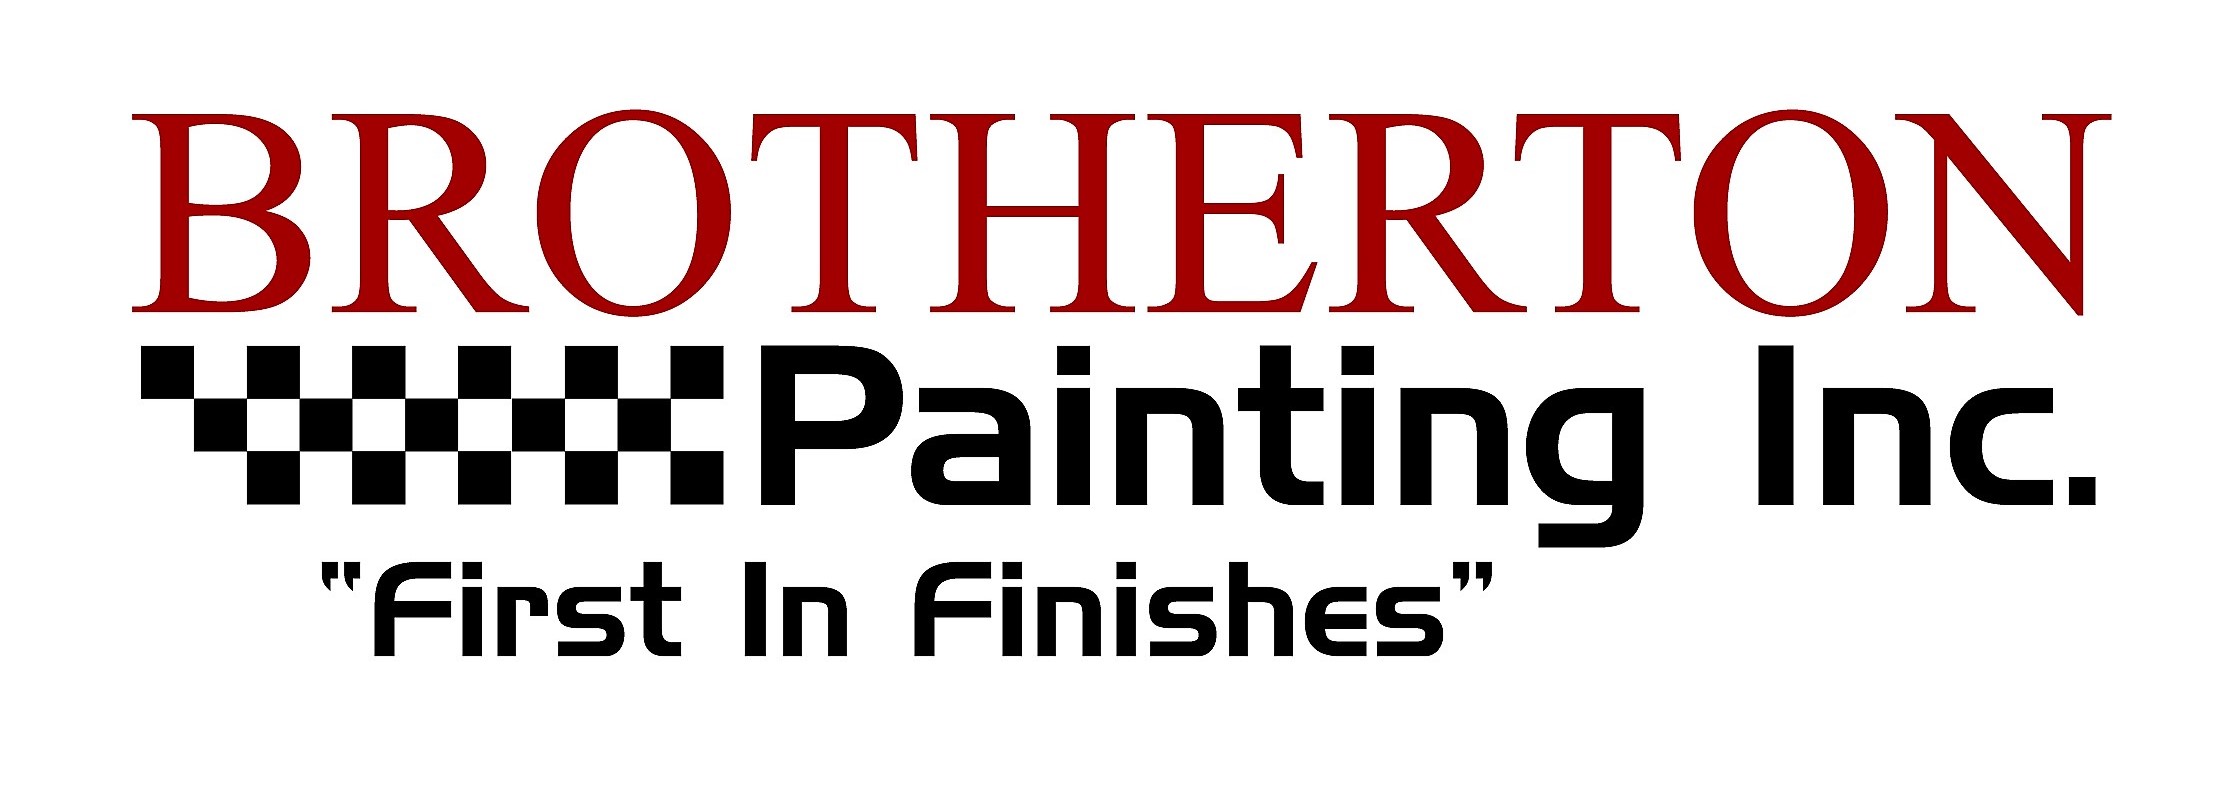 Brotherton Painting Full Safety Inspection Copy